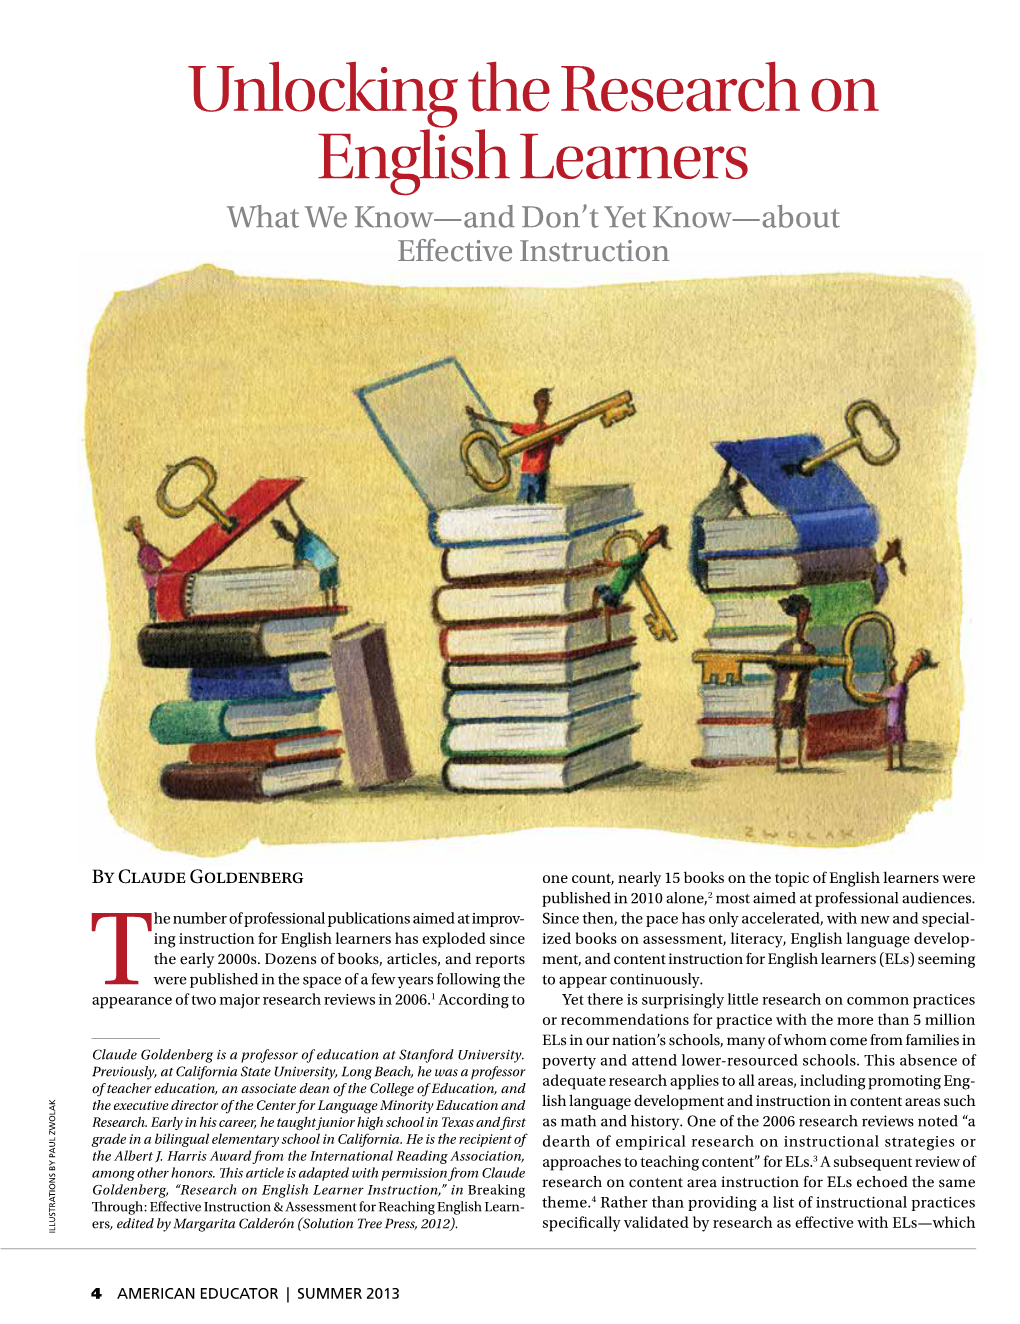 Unlocking the Research on English Learners What We Know—And Don’T Yet Know—About Effective Instruction